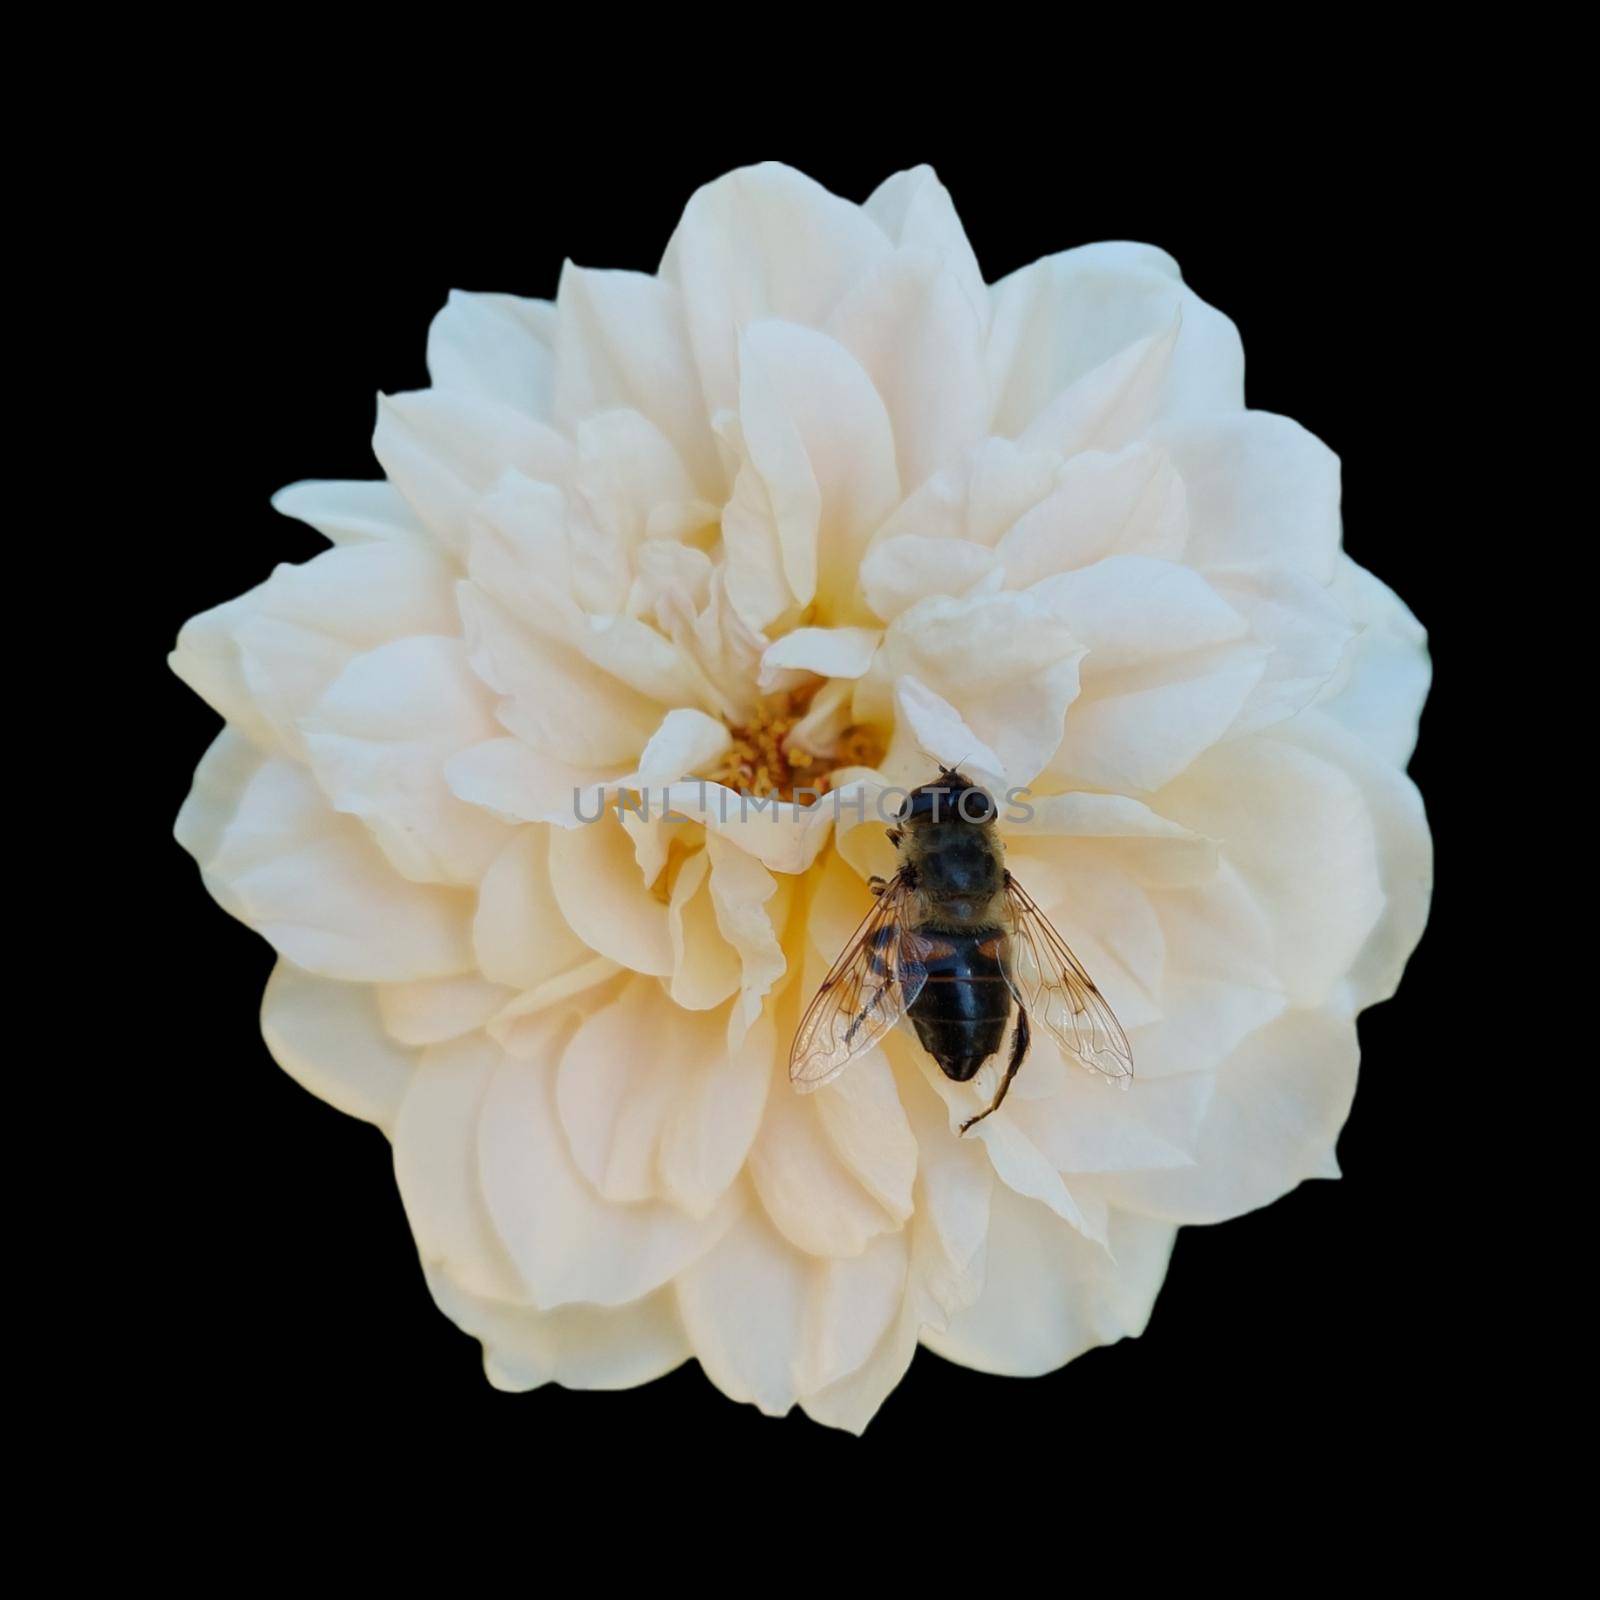 white rose isolated on black background with bee. by gallofoto